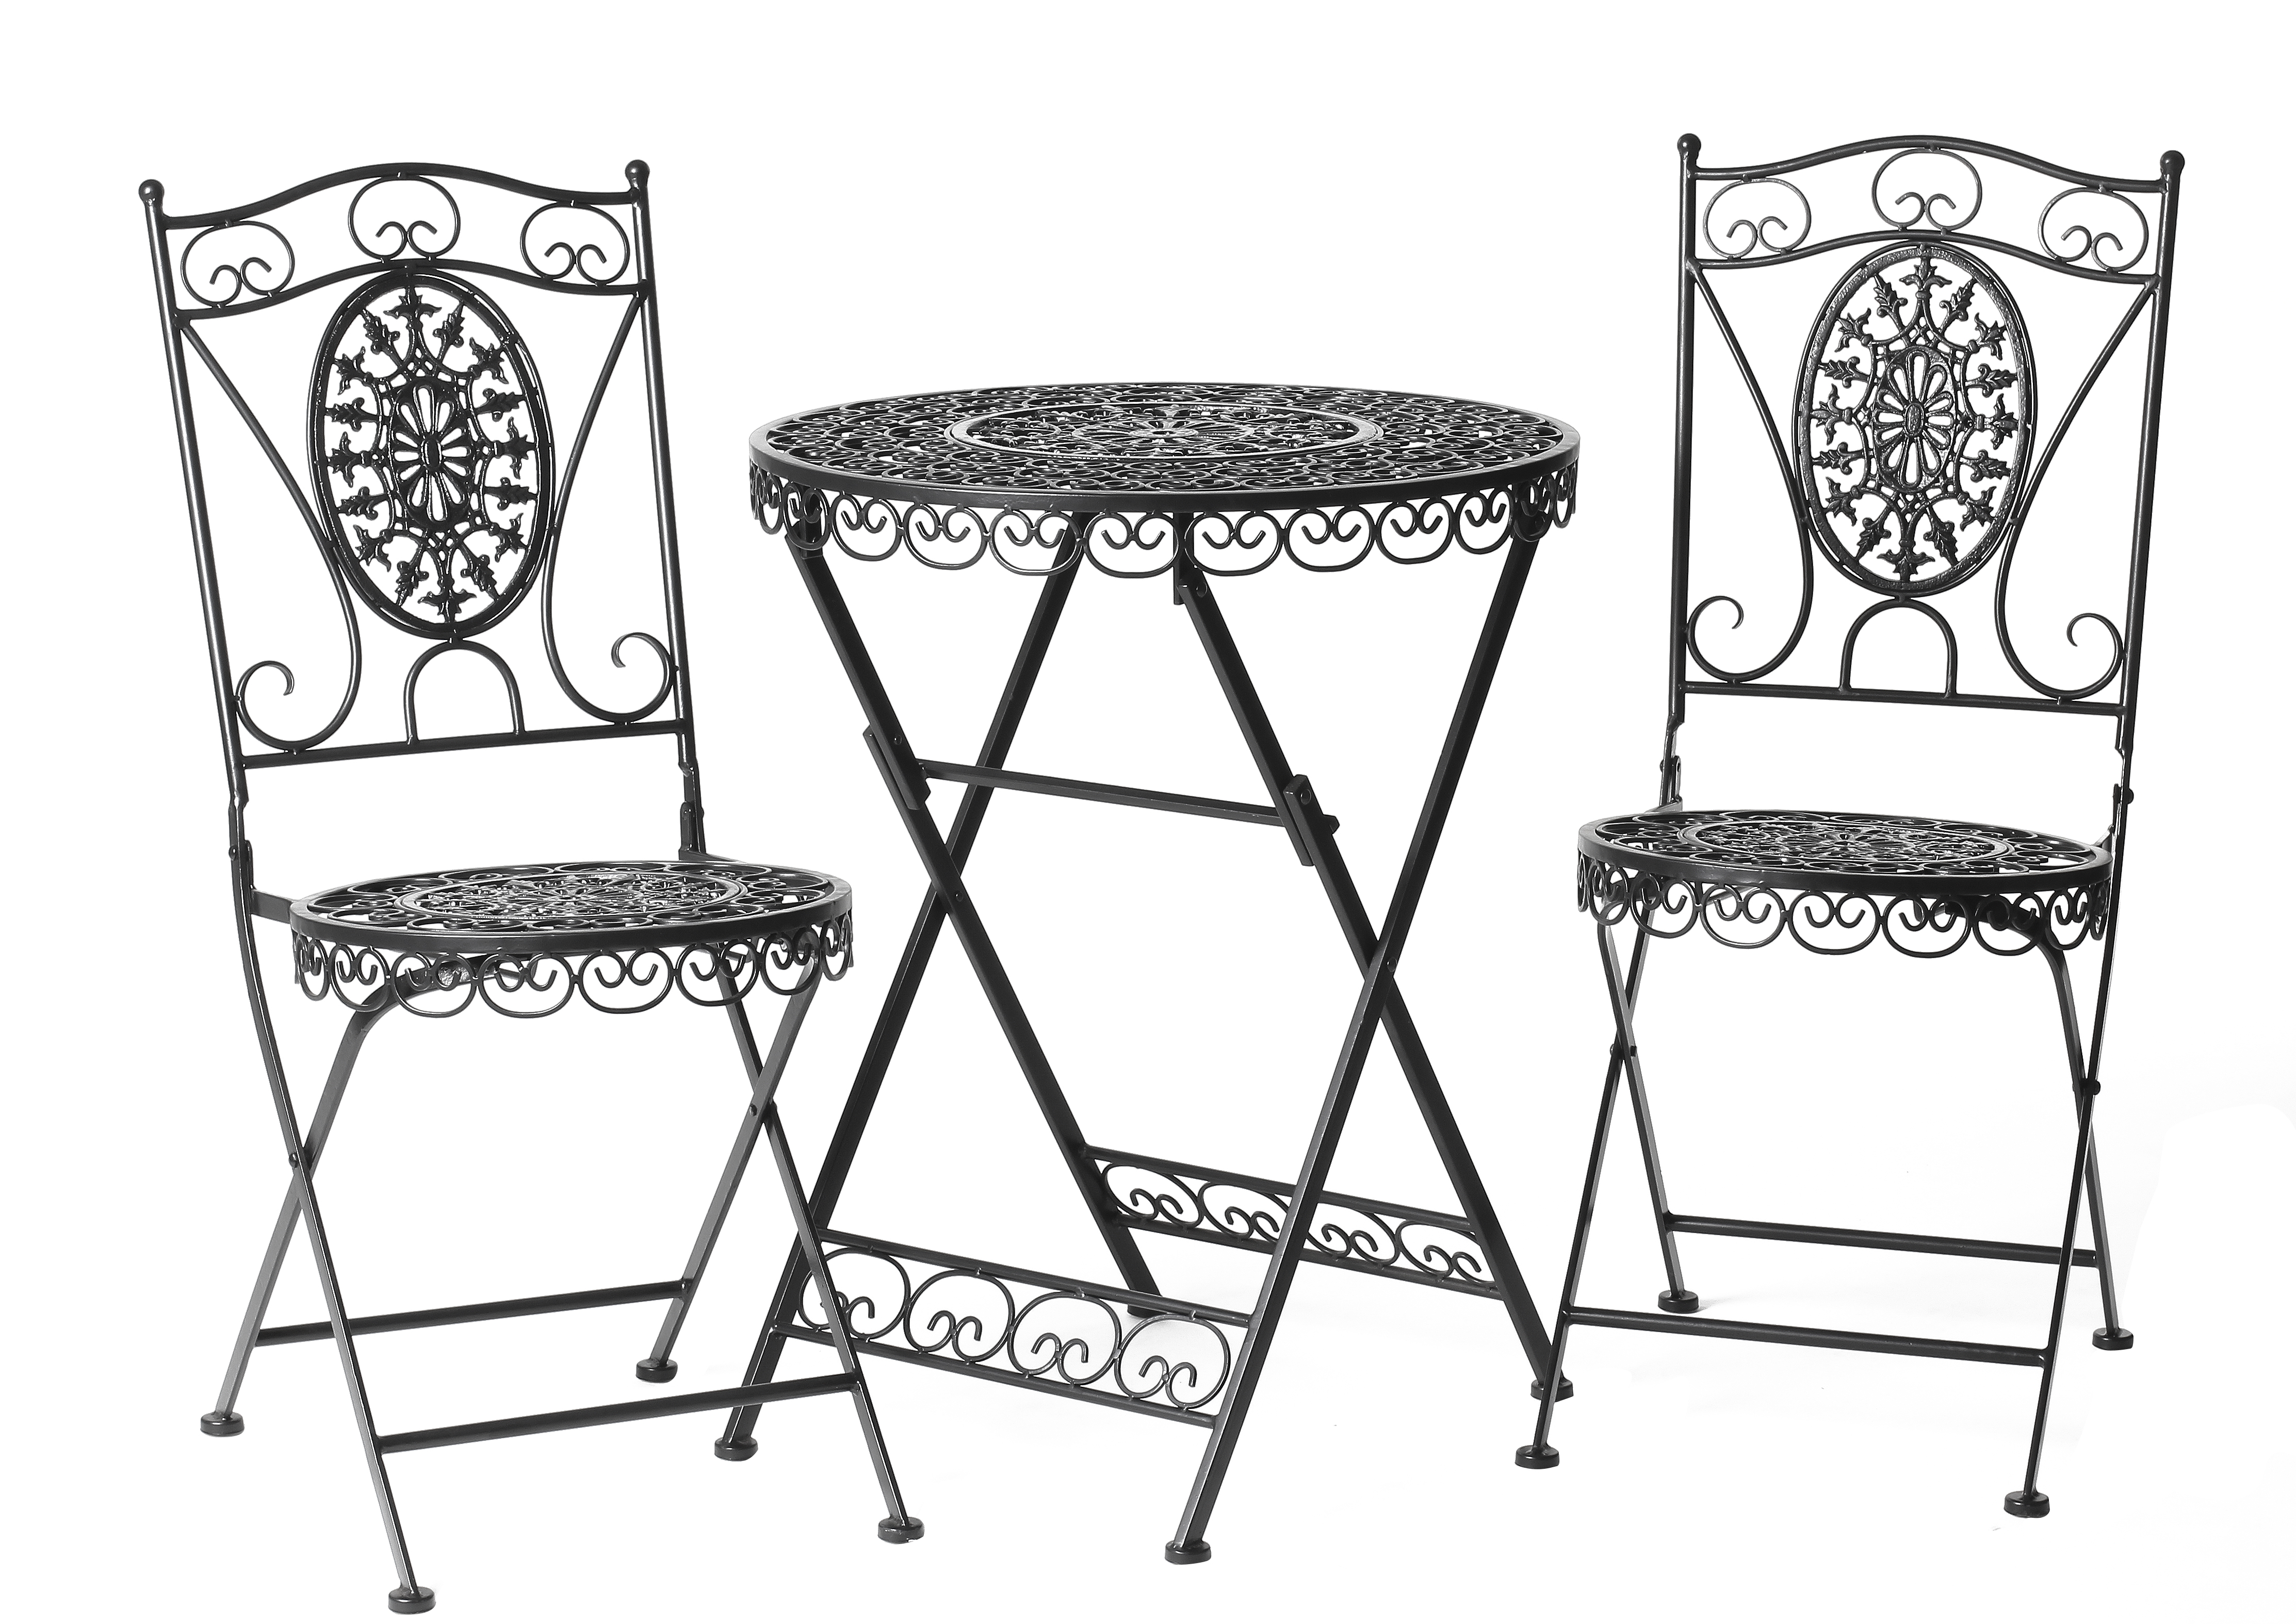 Antique Wrought Iron Outdoor Furniture Patio Garden Set Portable Table and Chair 6804 Featured Image